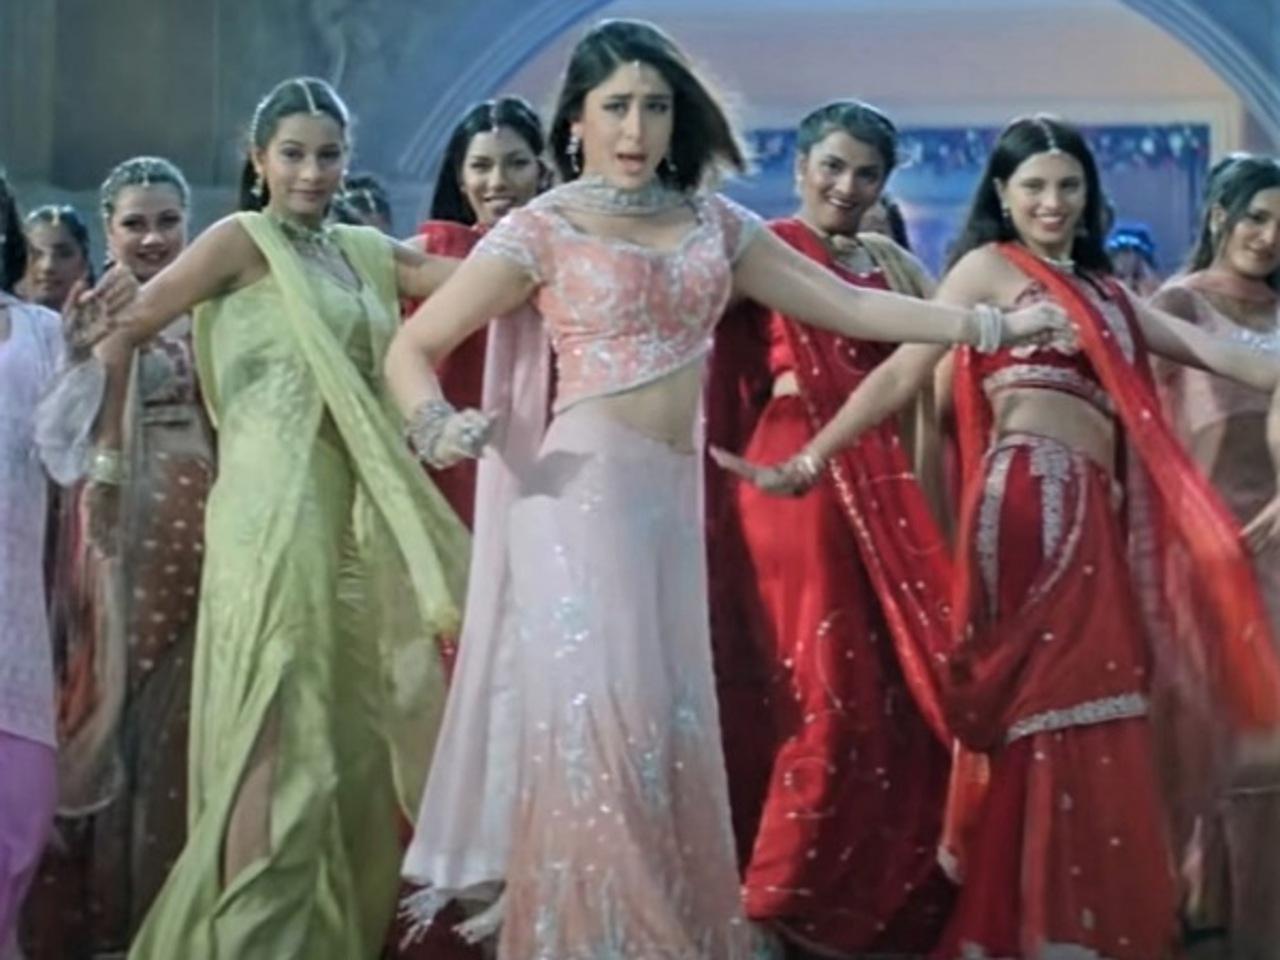 Kareena had little do with traditional outfits in the film but when she did she slayed in them. The nude colours with shimmery work and beuatiful cuts on the blouse make this a memorable outfit